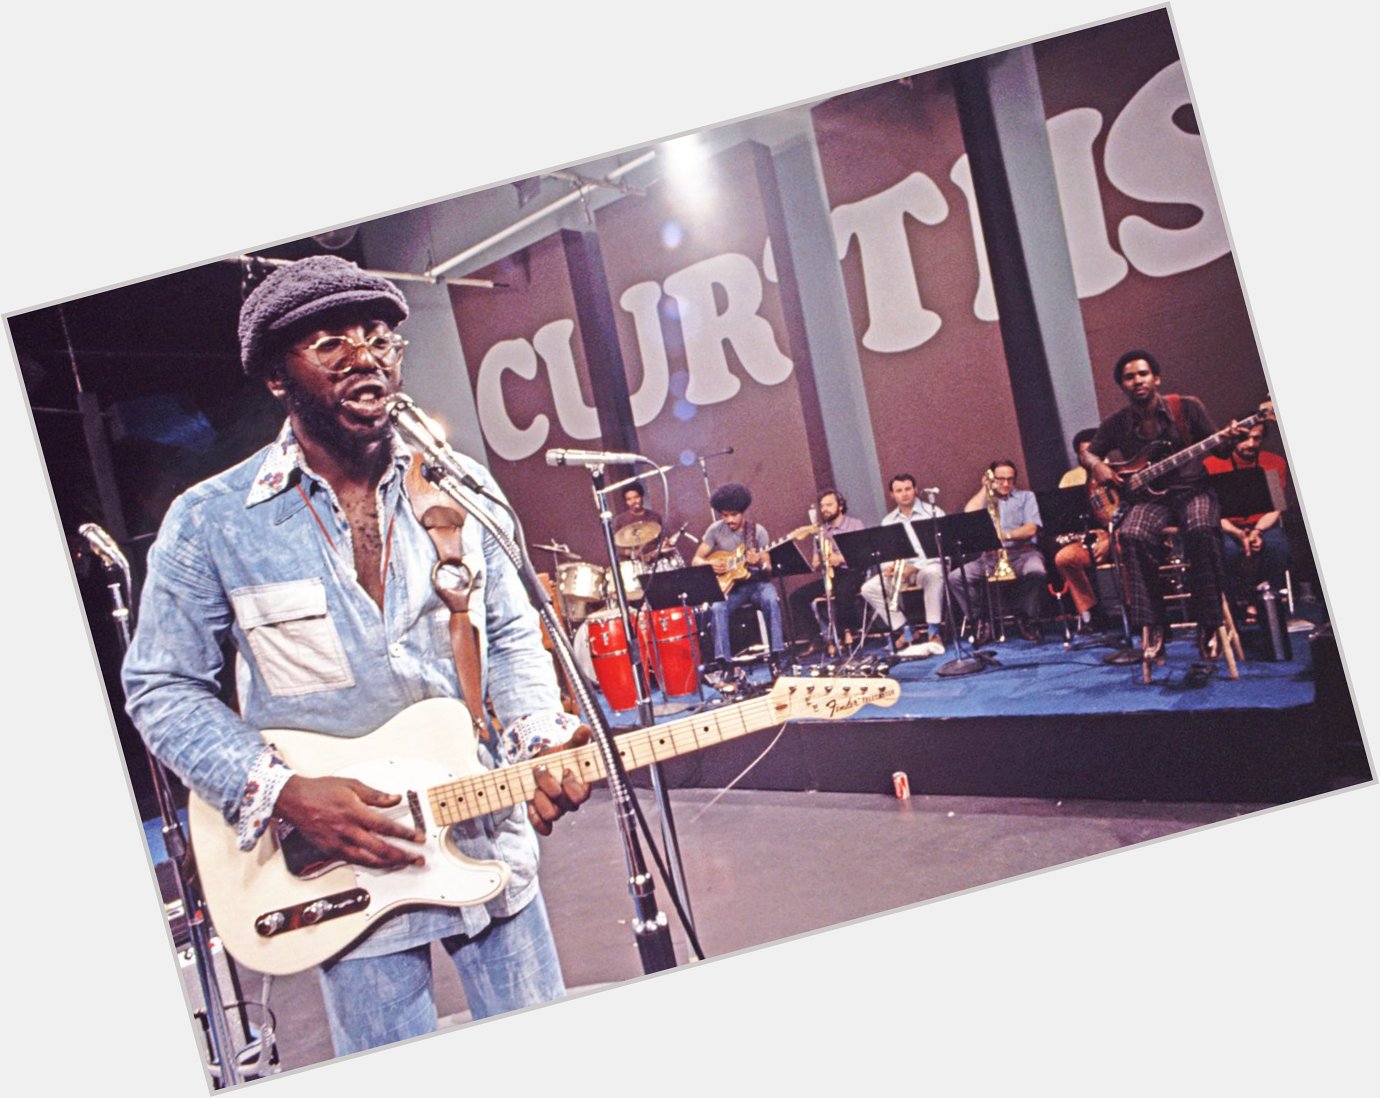 Happy Birthday and Rest in Power, Curtis Mayfield. 